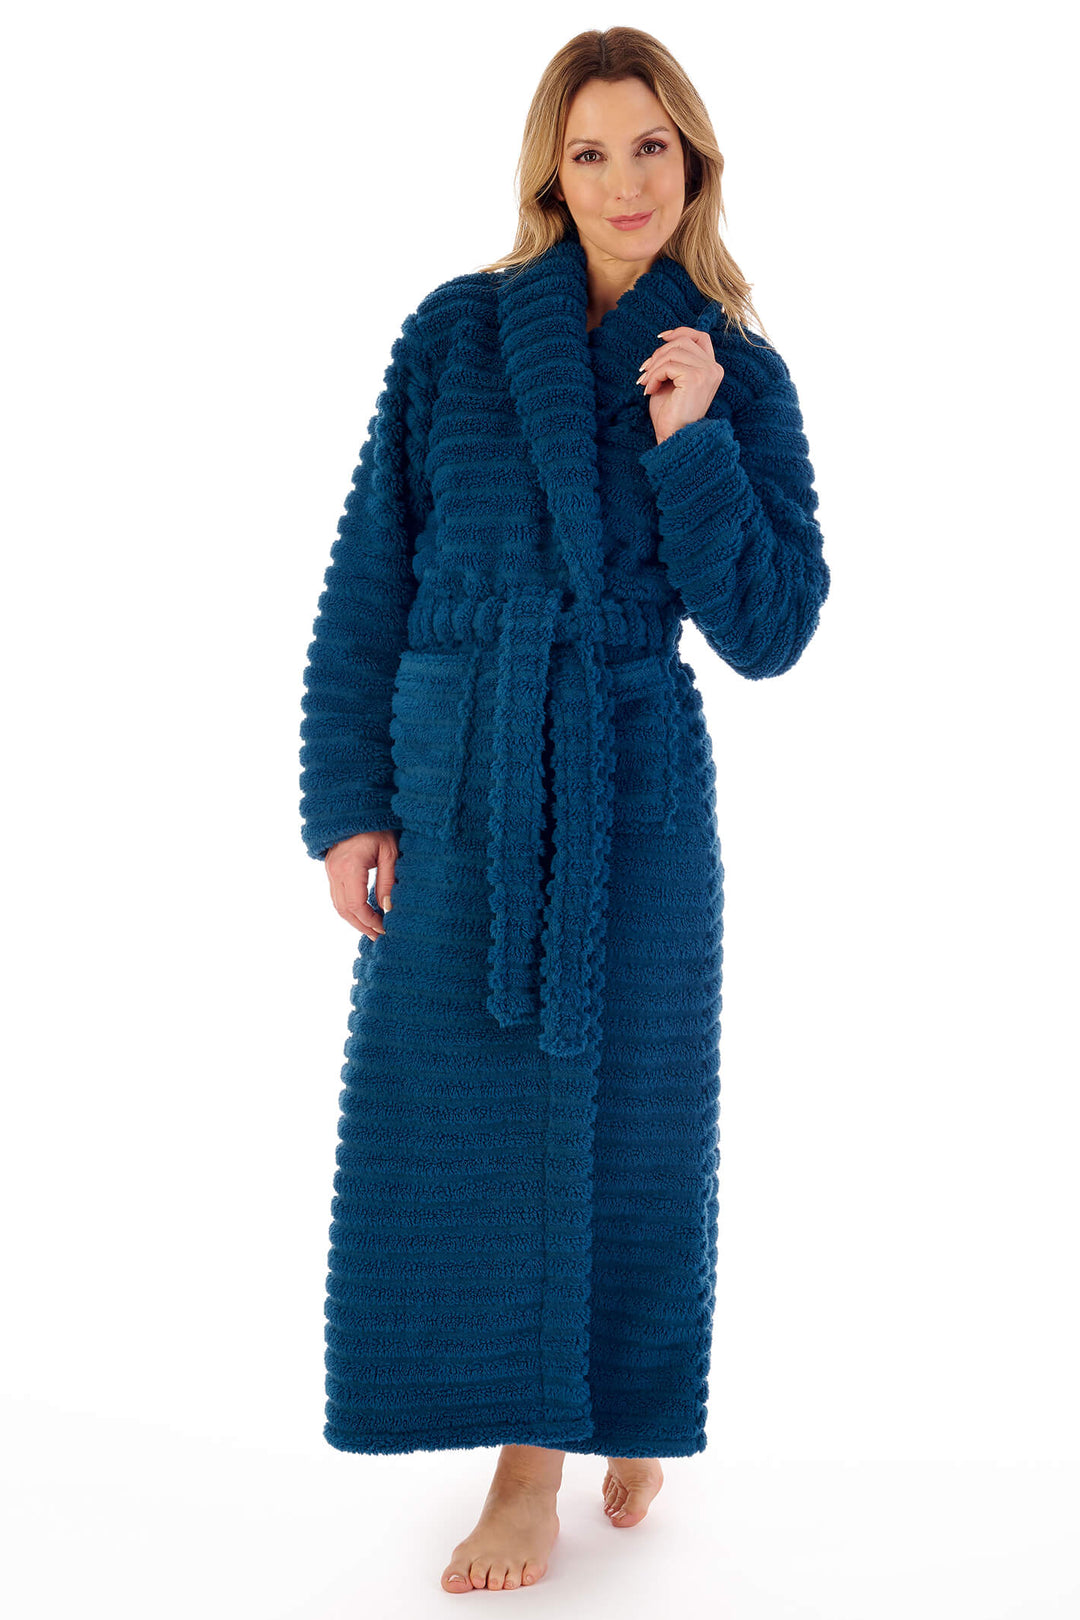 Slenderella HC02321 Teal Wrap Housecoat Dressing Gown - Shirley Allum Boutique